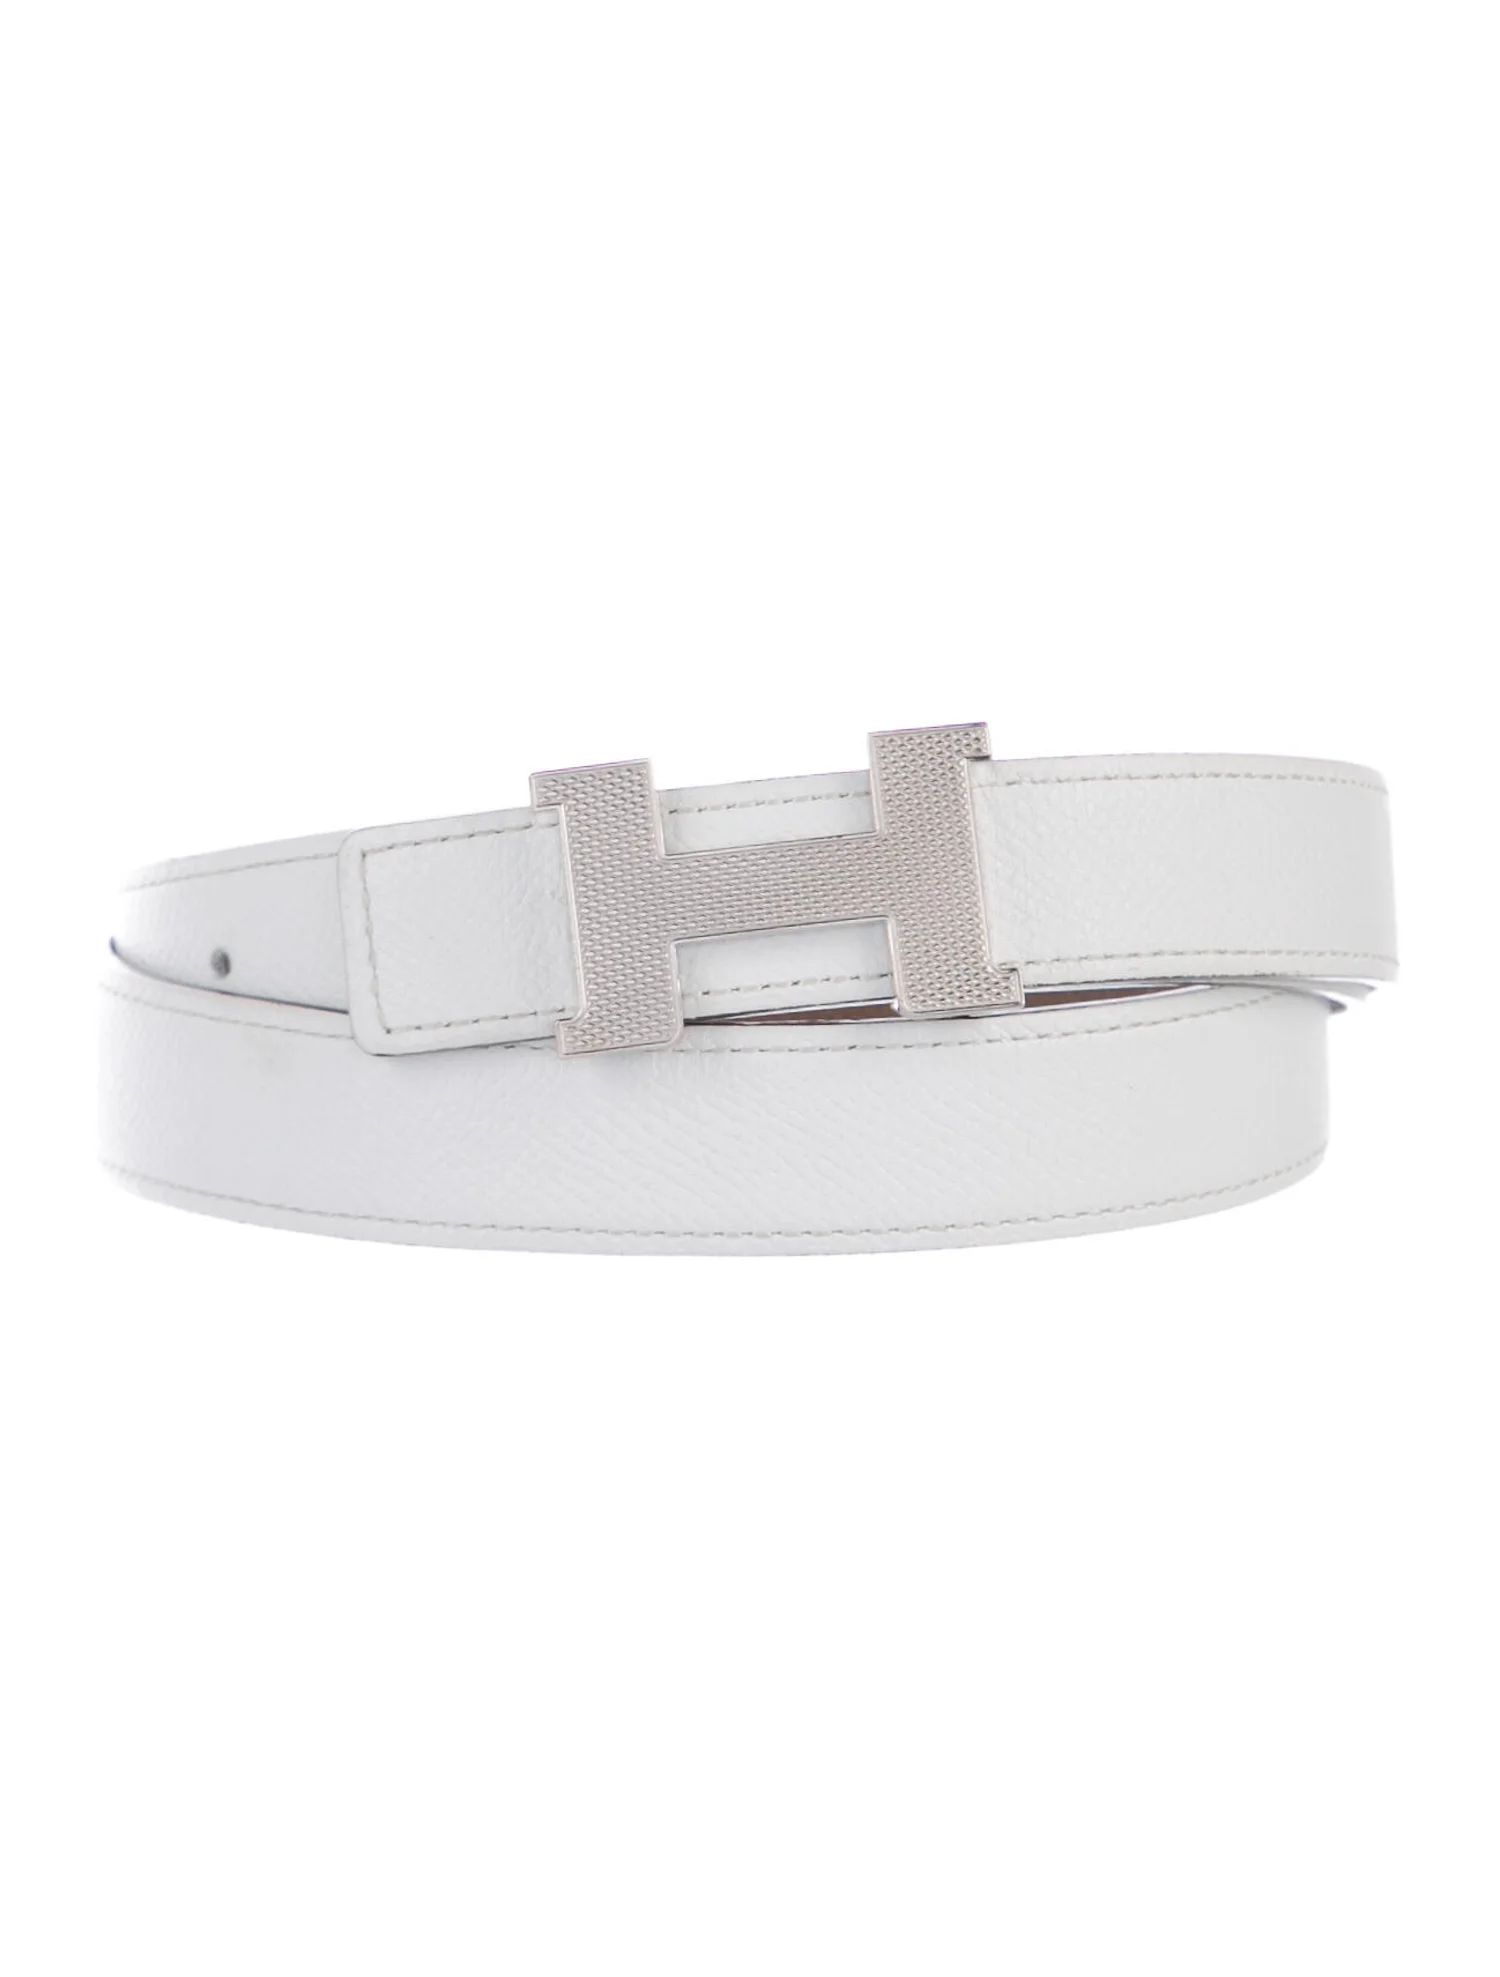 Reversible 24 mm Guilloché Belt Kit | The RealReal